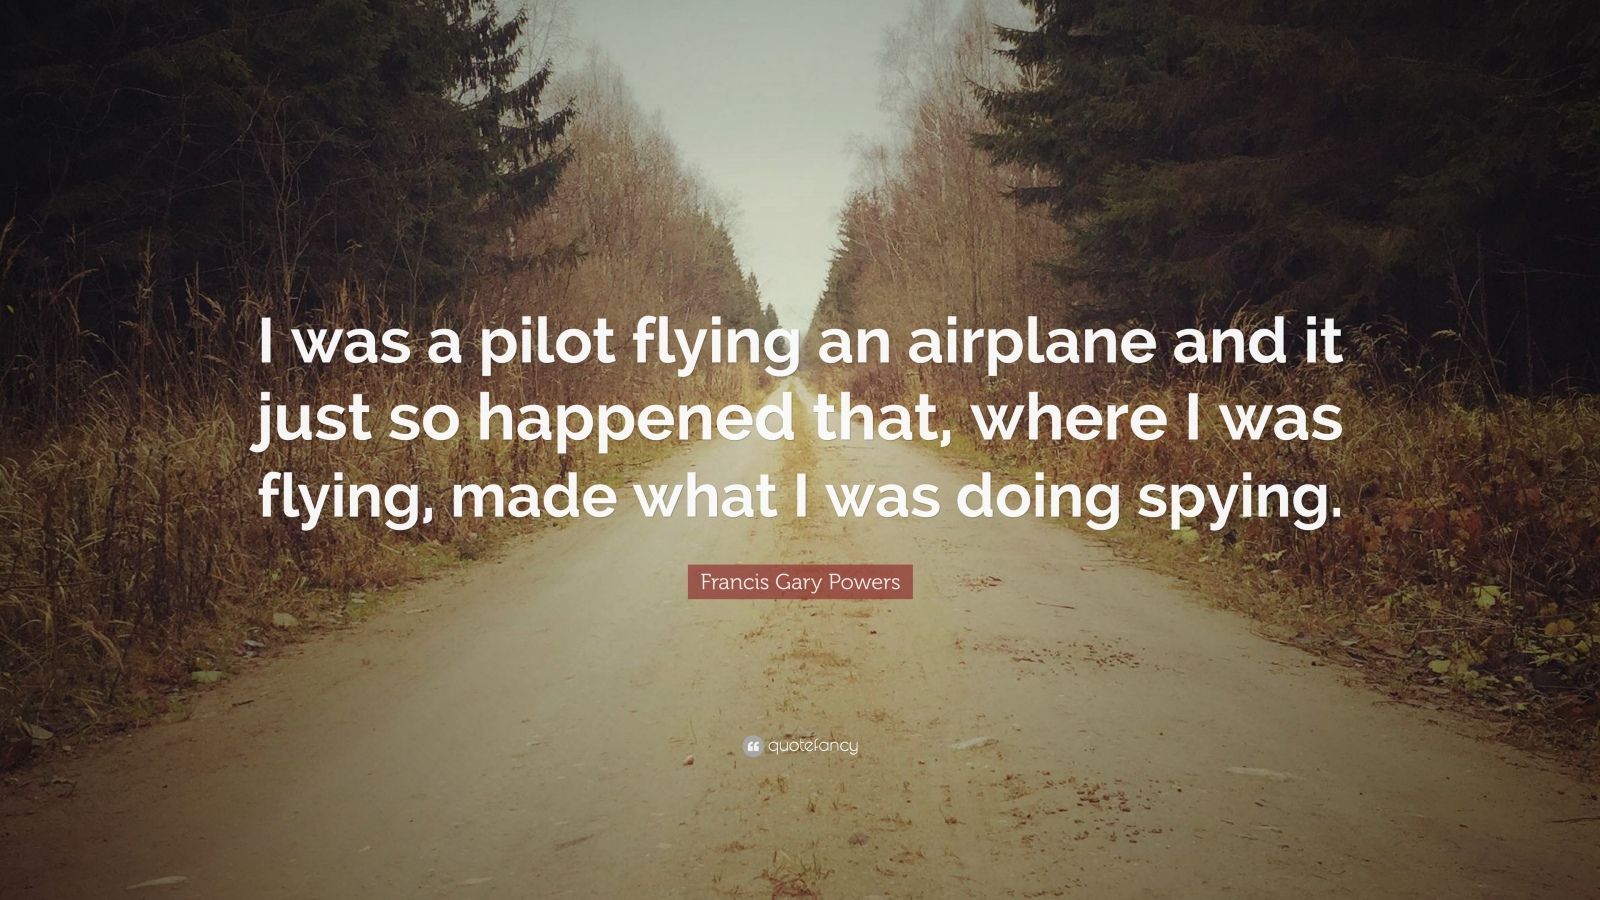 Francis Gary Powers Quote: “I was a pilot flying an airplane